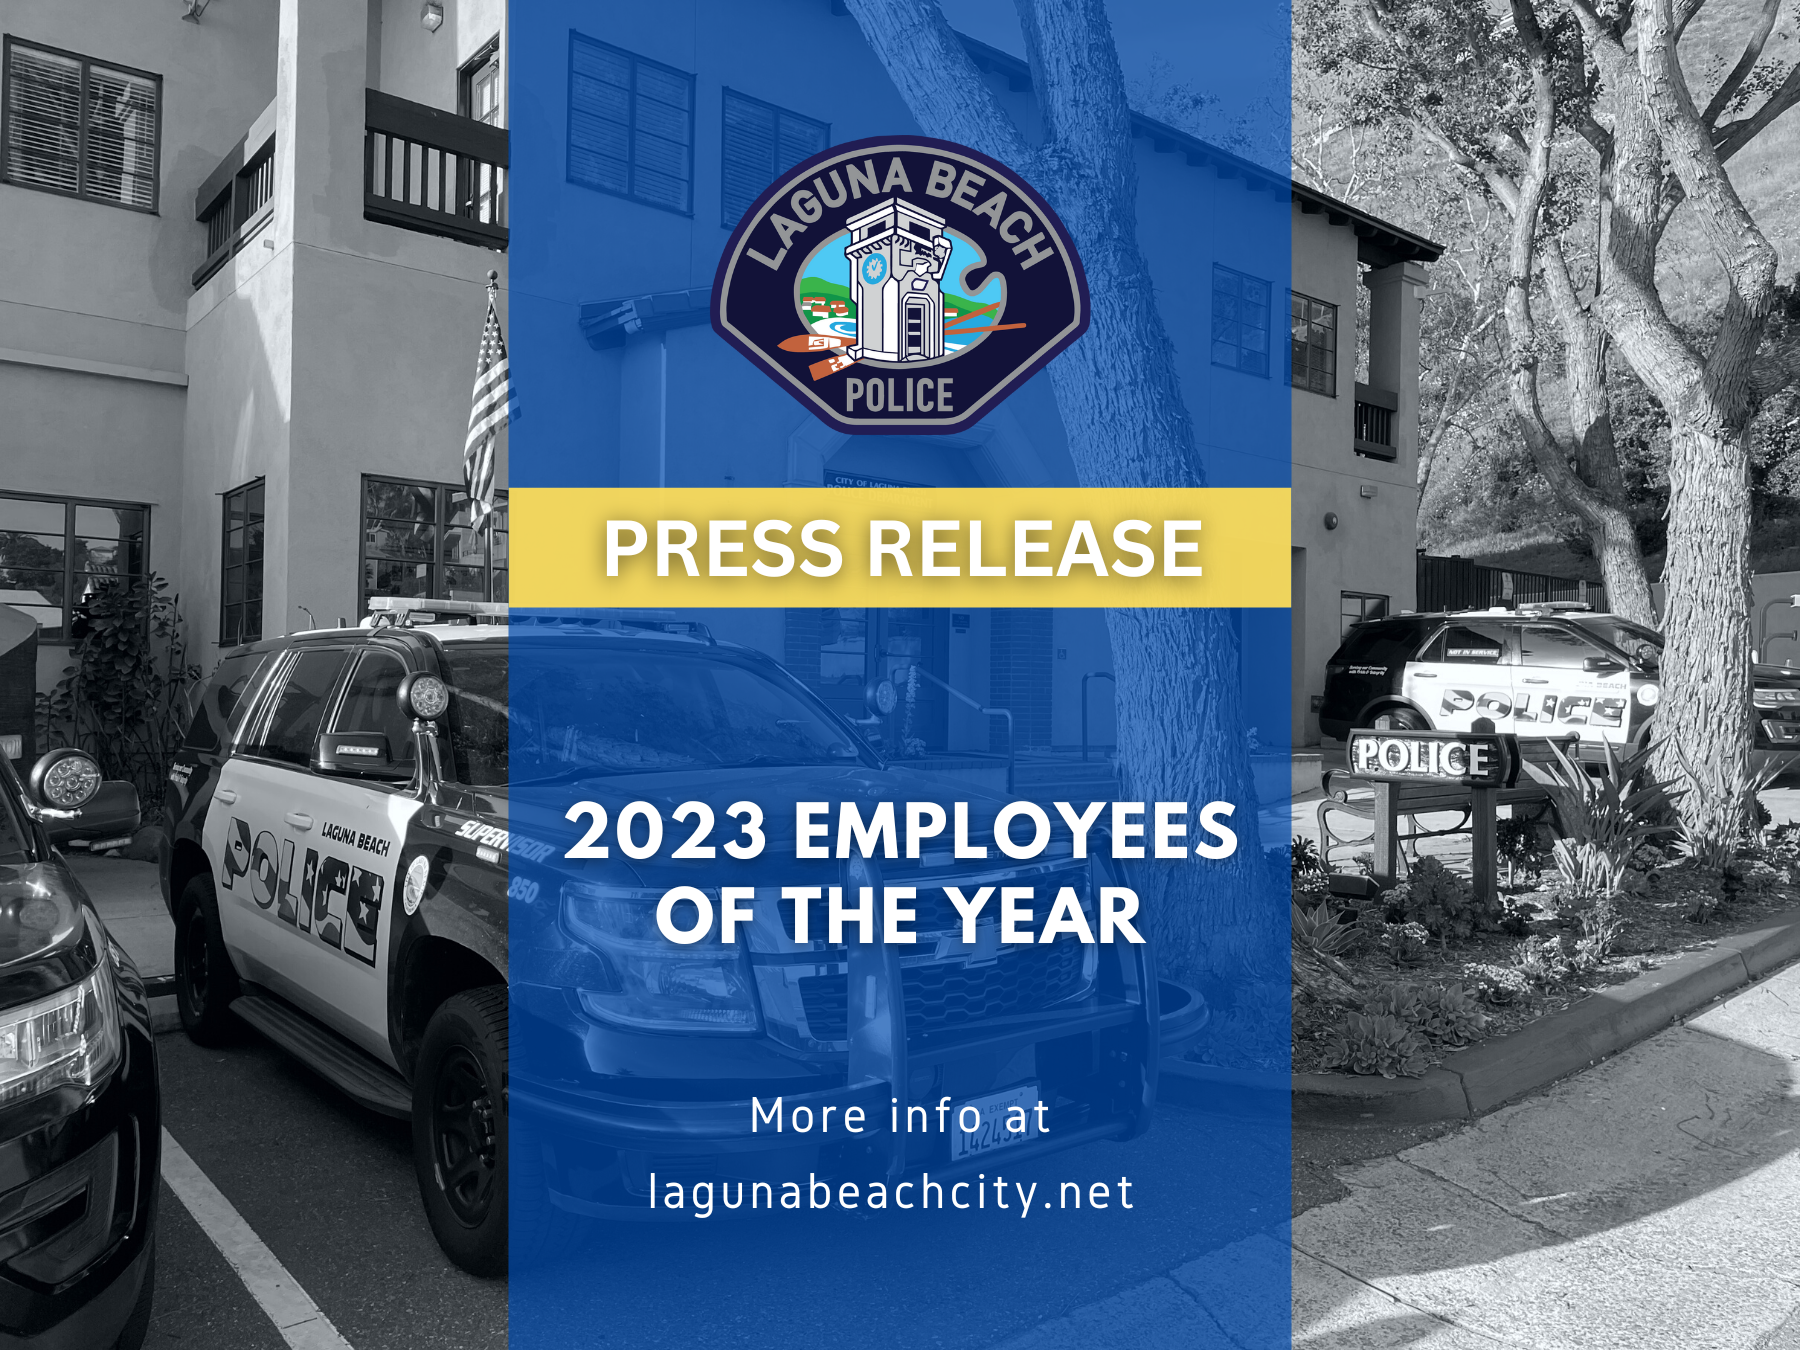 LBPD 2023 Employees of the Year